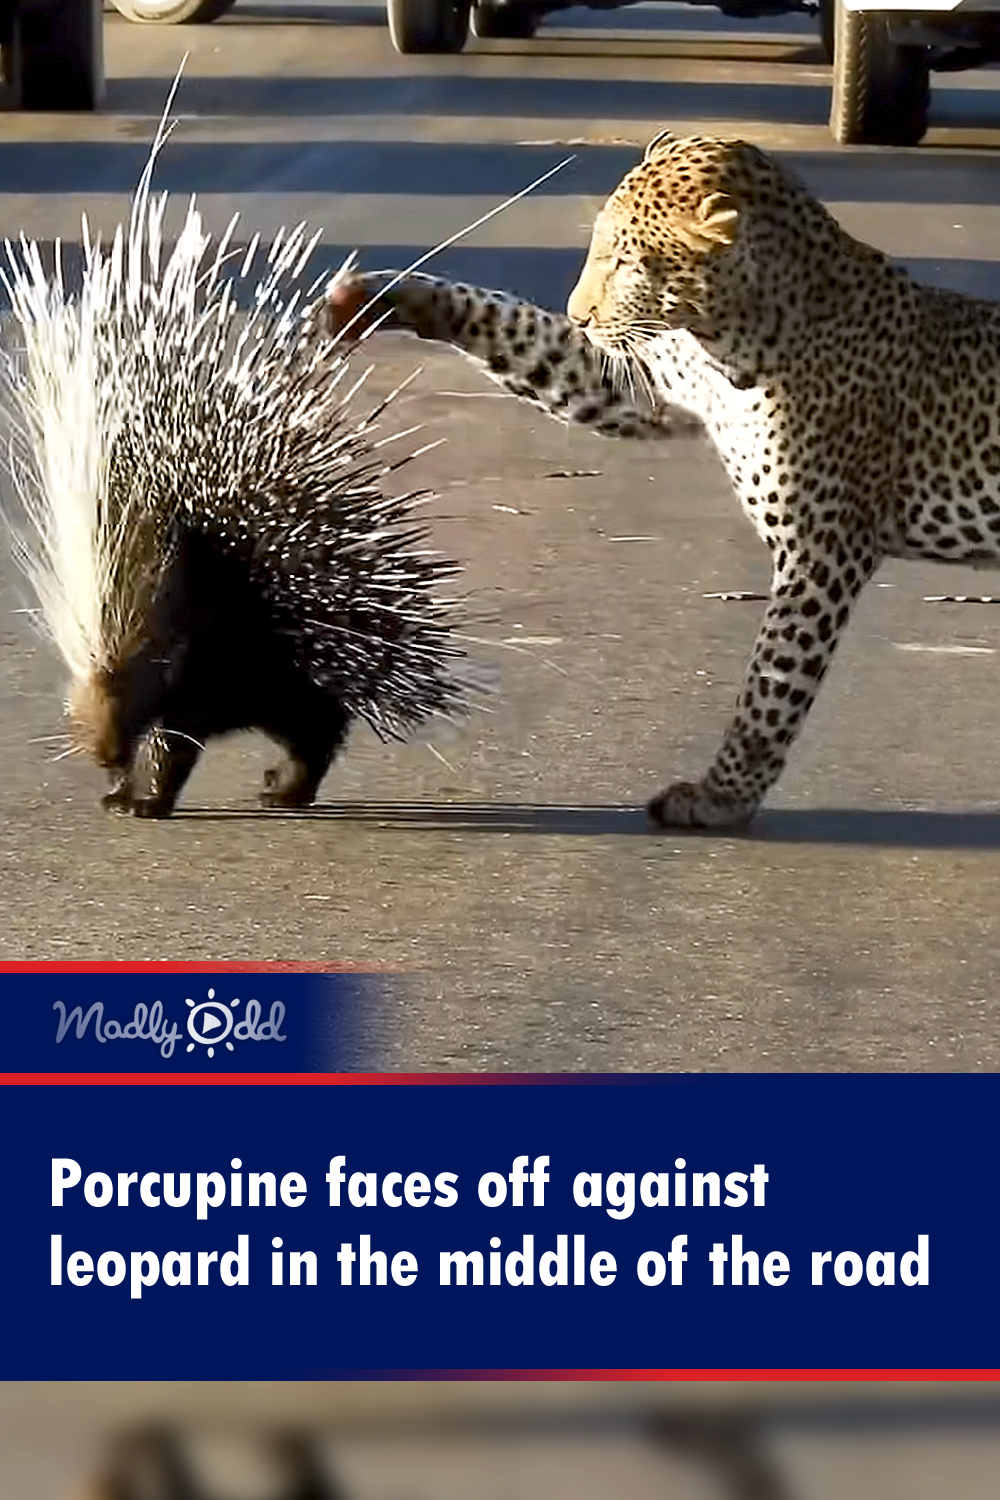 Porcupine faces off against leopard in the middle of the road